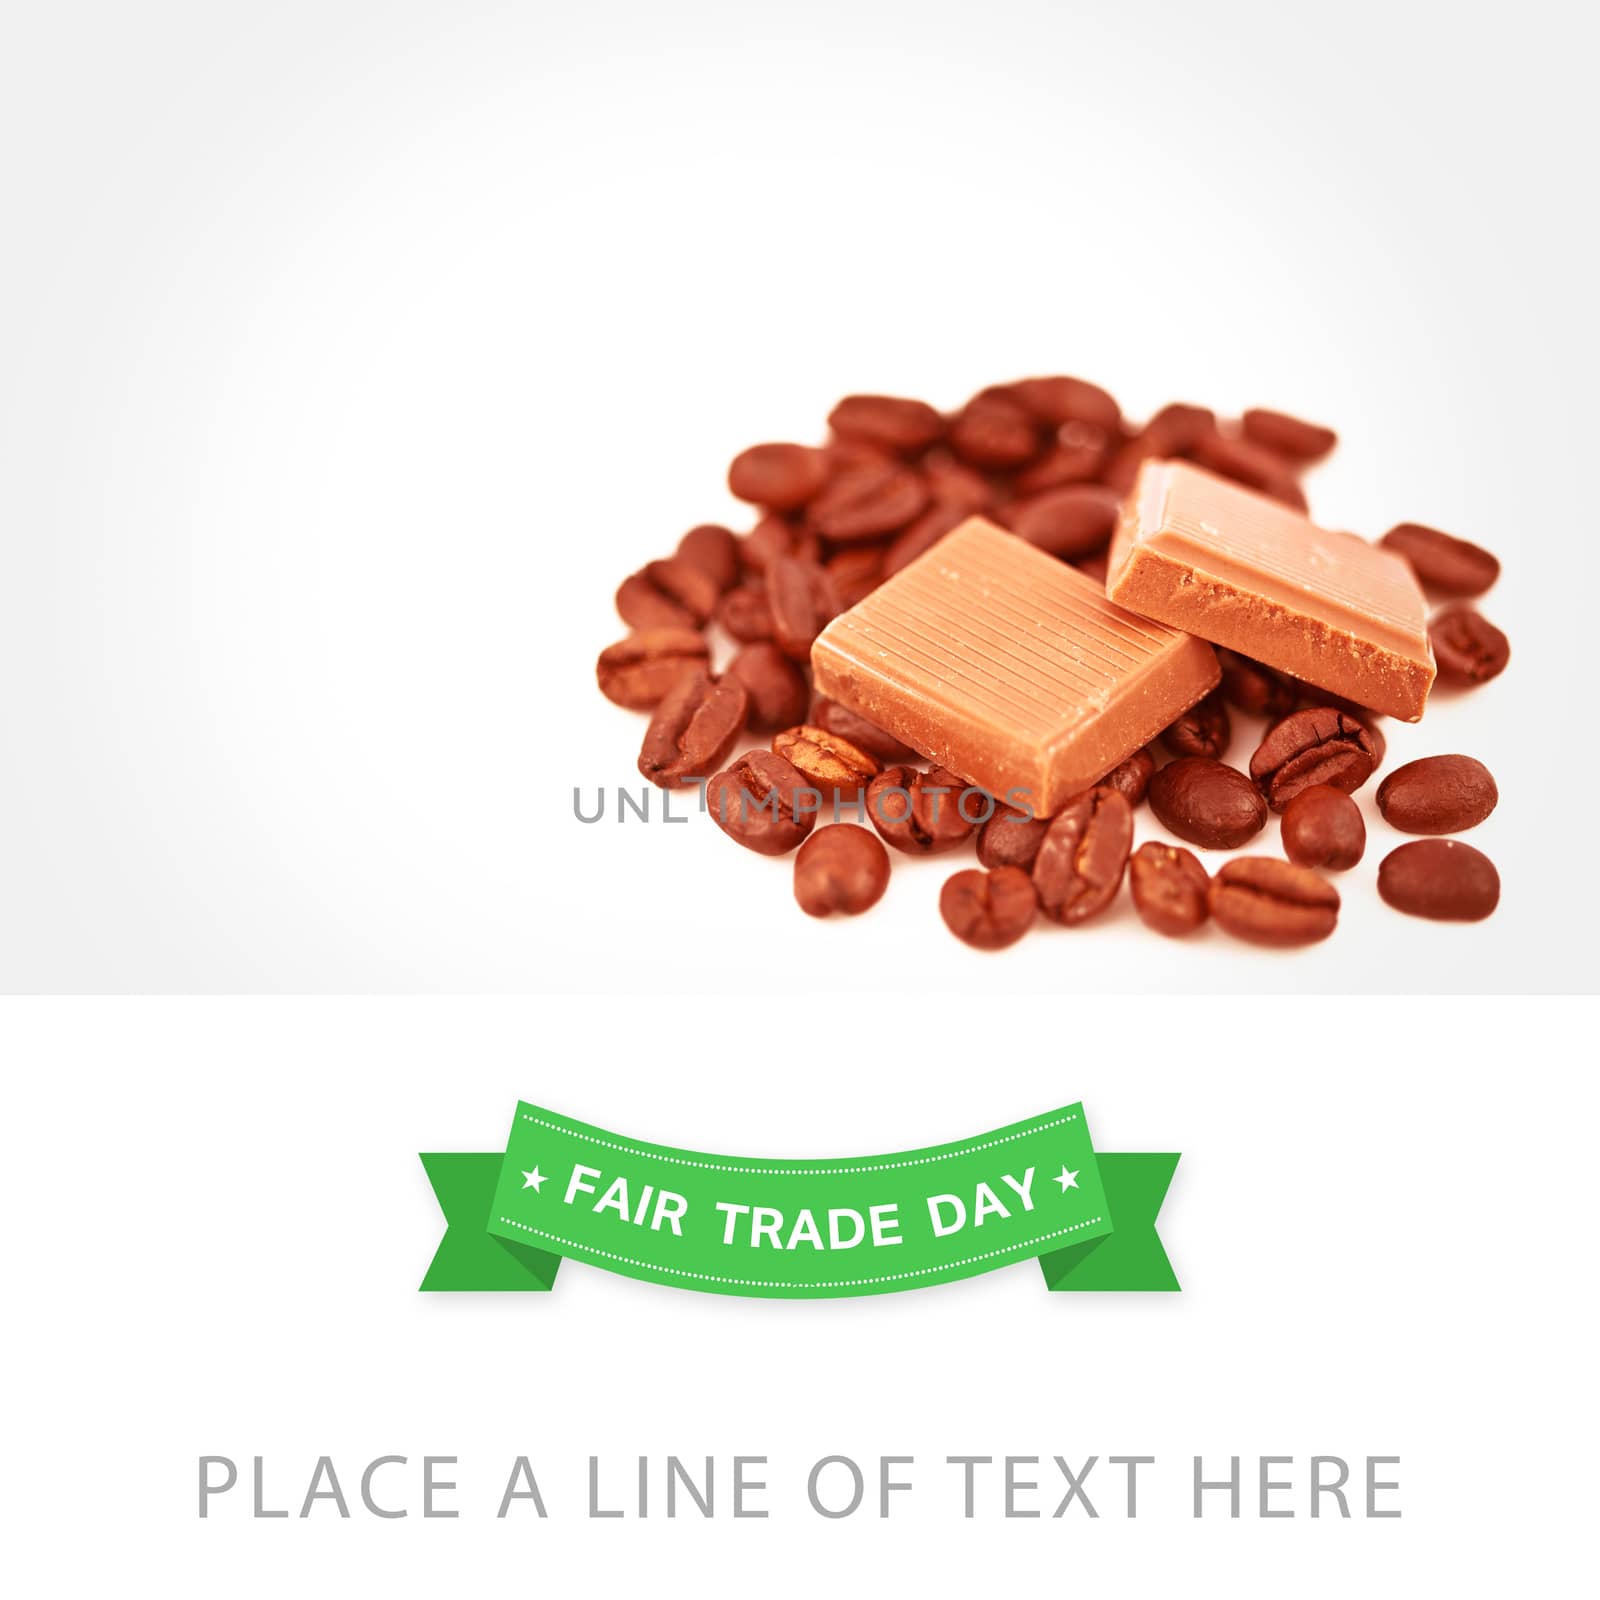 Fair Trade graphic against two pieces of chocolate on coffee seeds